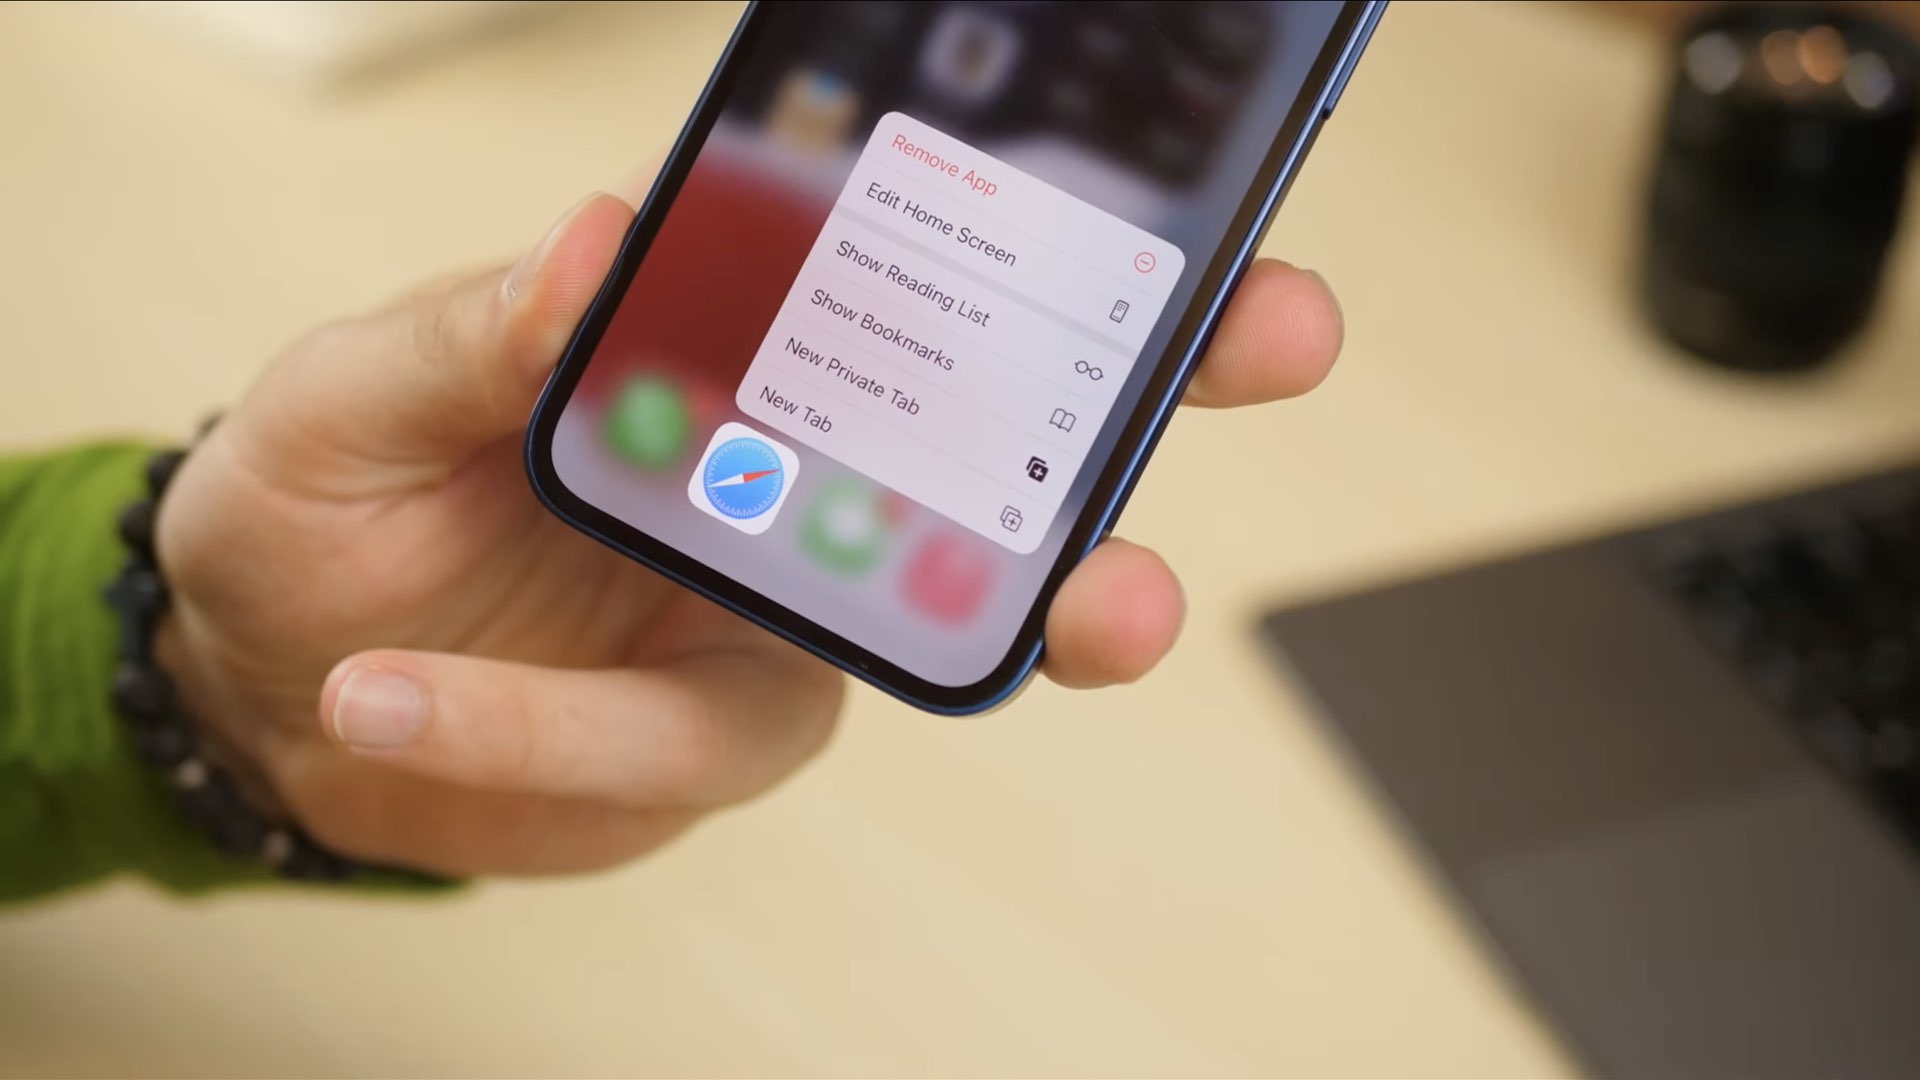 A photo displaying an iPhone held in hand with the contextual menu for iOS 15 Safari shown on iPhone